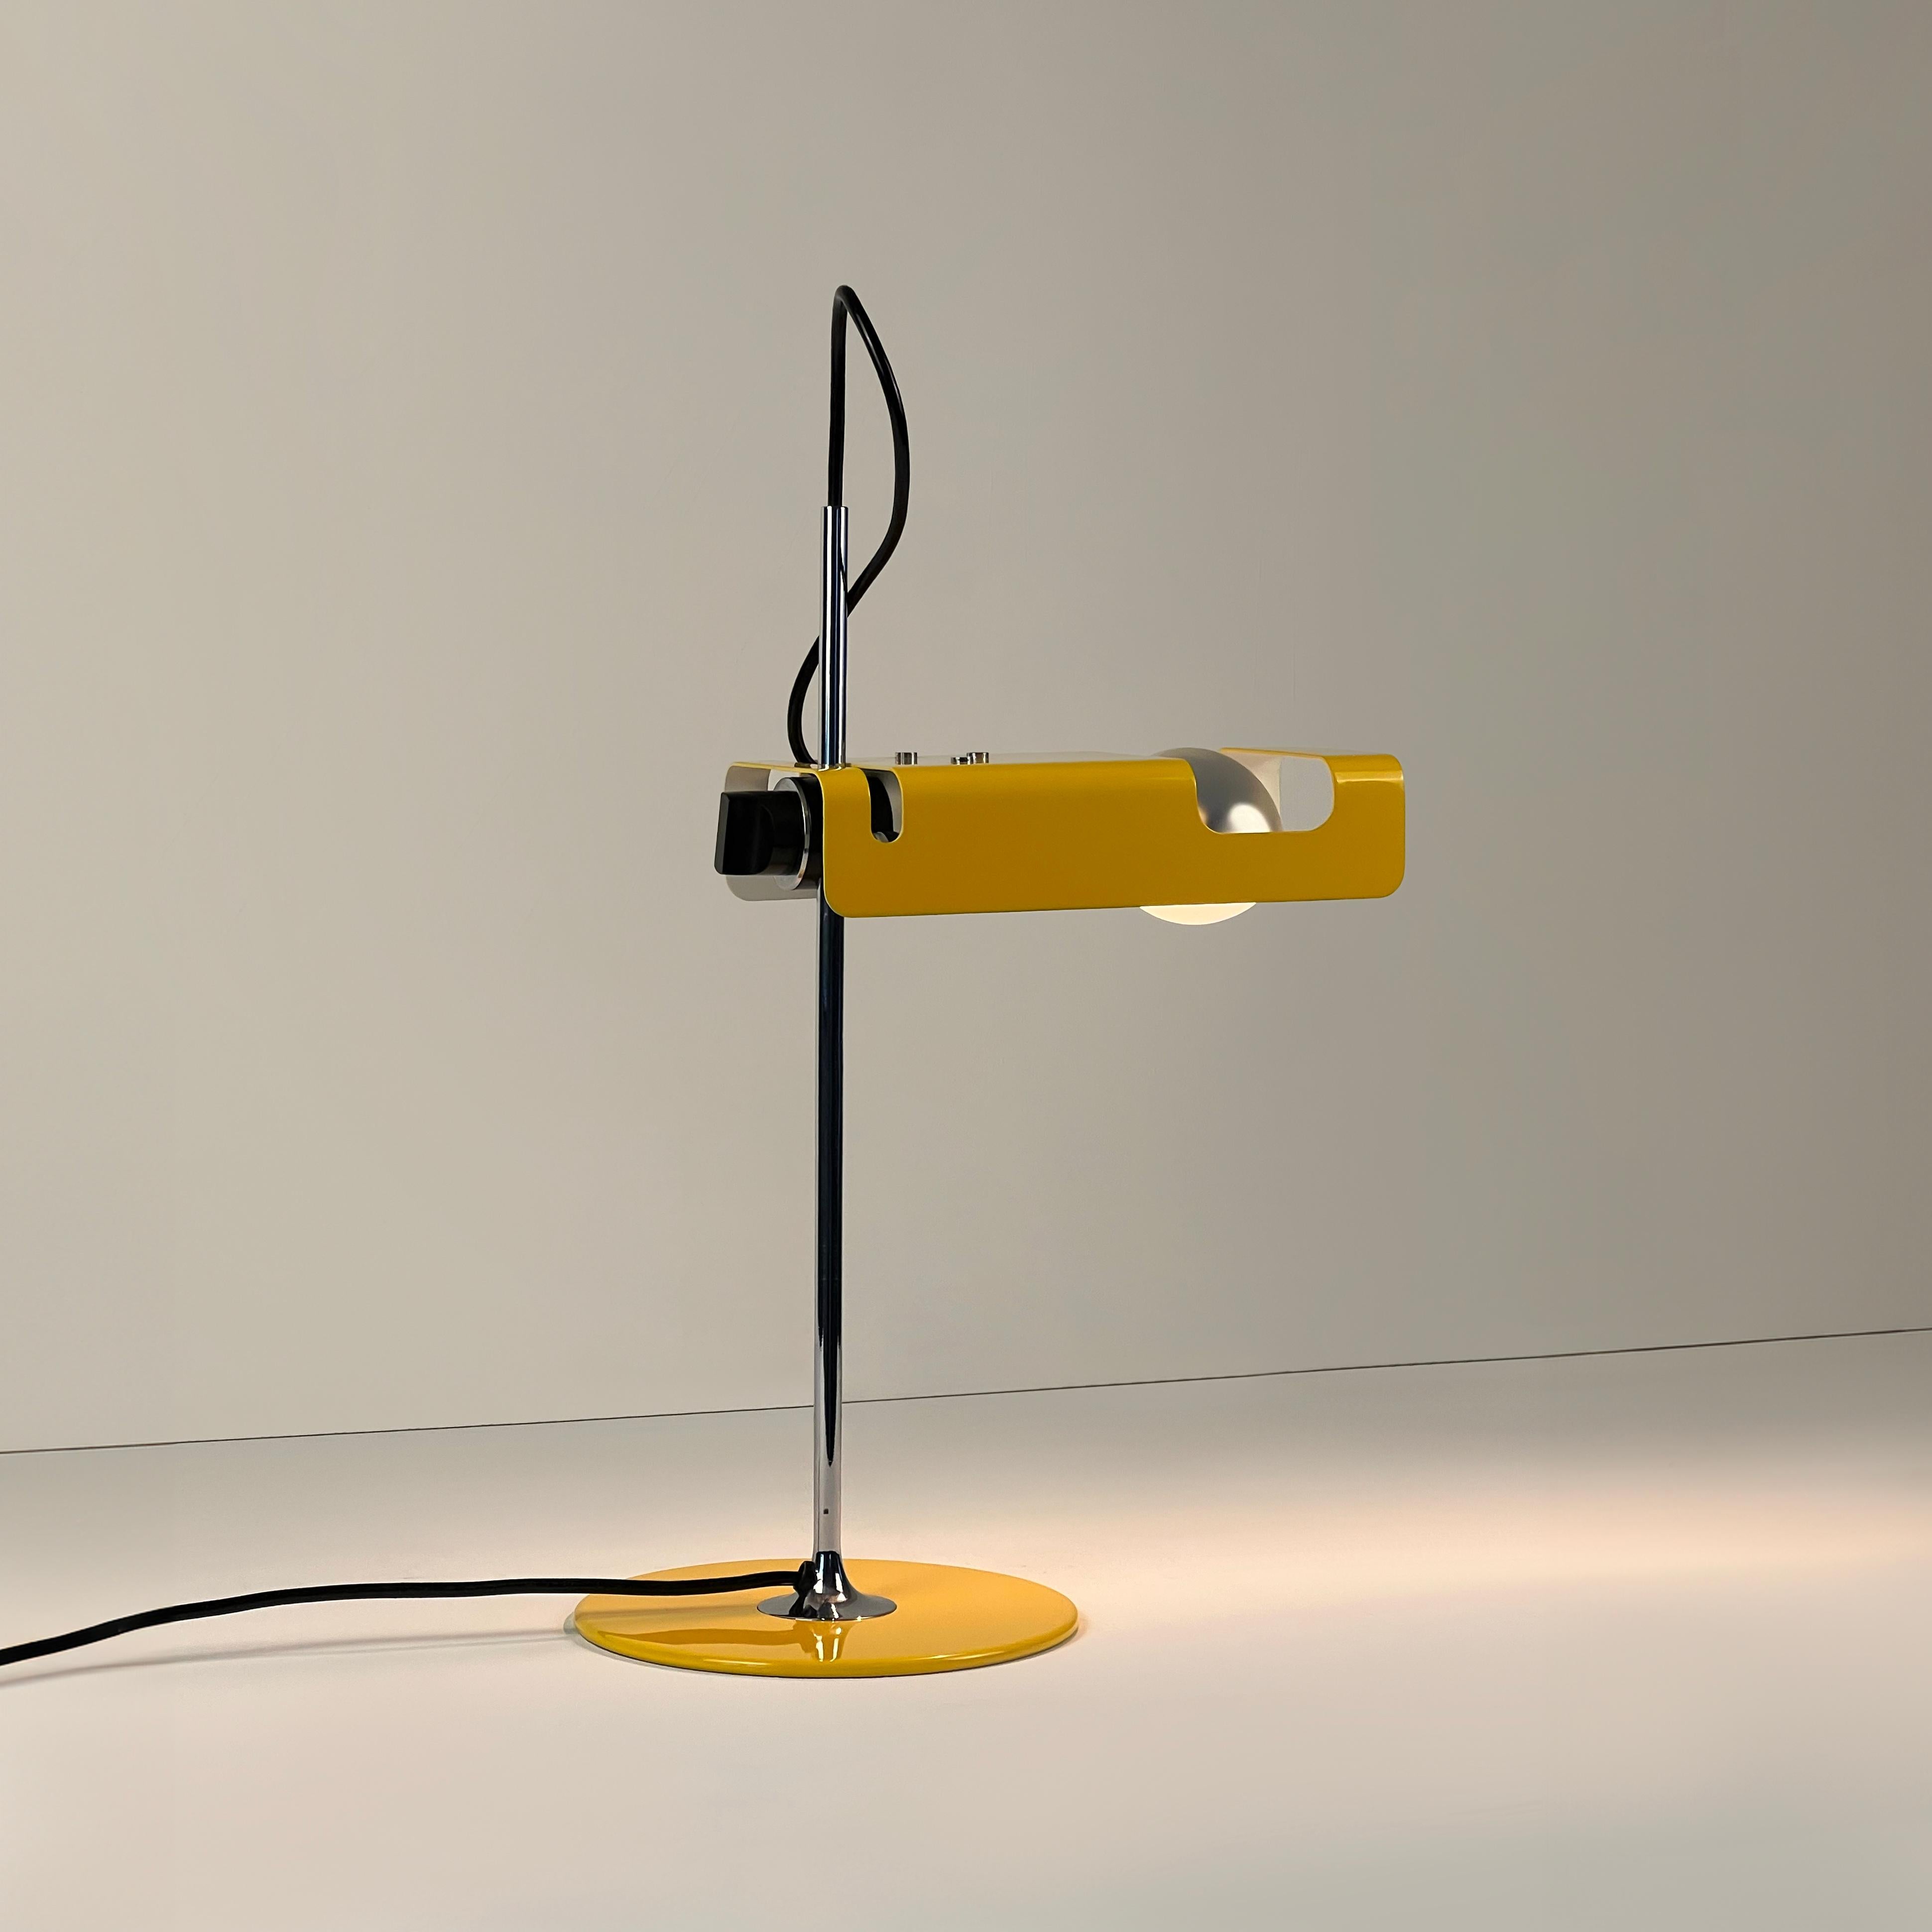 Spider Table Lamp designed by Joe Colombo for Oluce, 1st edition. Italy, 1965.

Here’s a first edition featuring the original bayonet B22 version and available in the rare yellow color.

Crafted in yellow lacquered metal and chrome, this piece